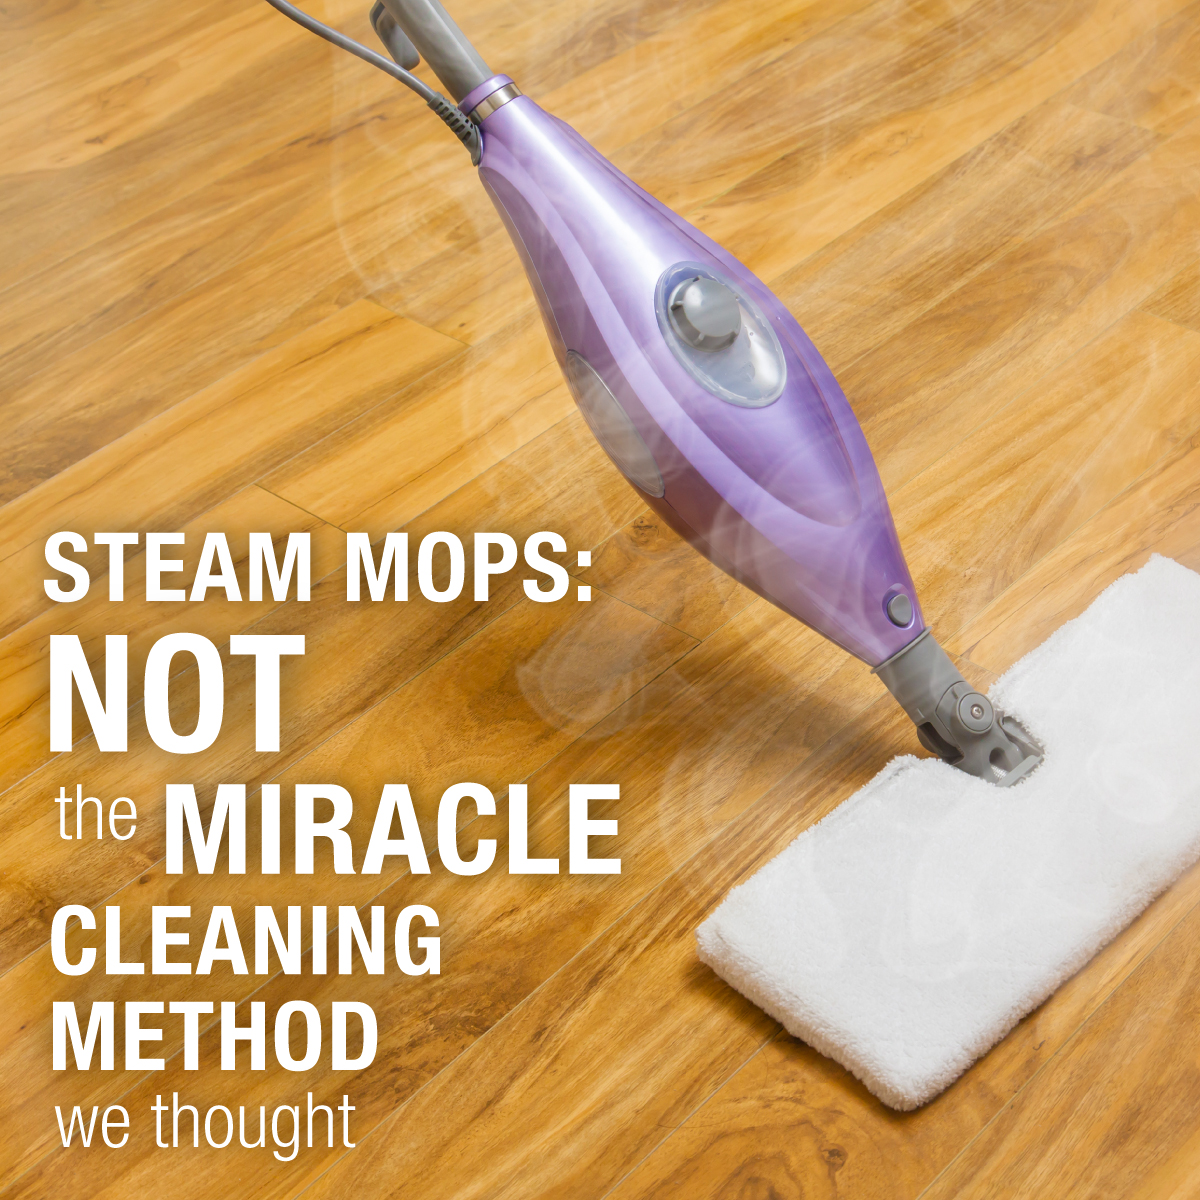 Can You Use Steam Cleaner on Vinyl Plank Floor?